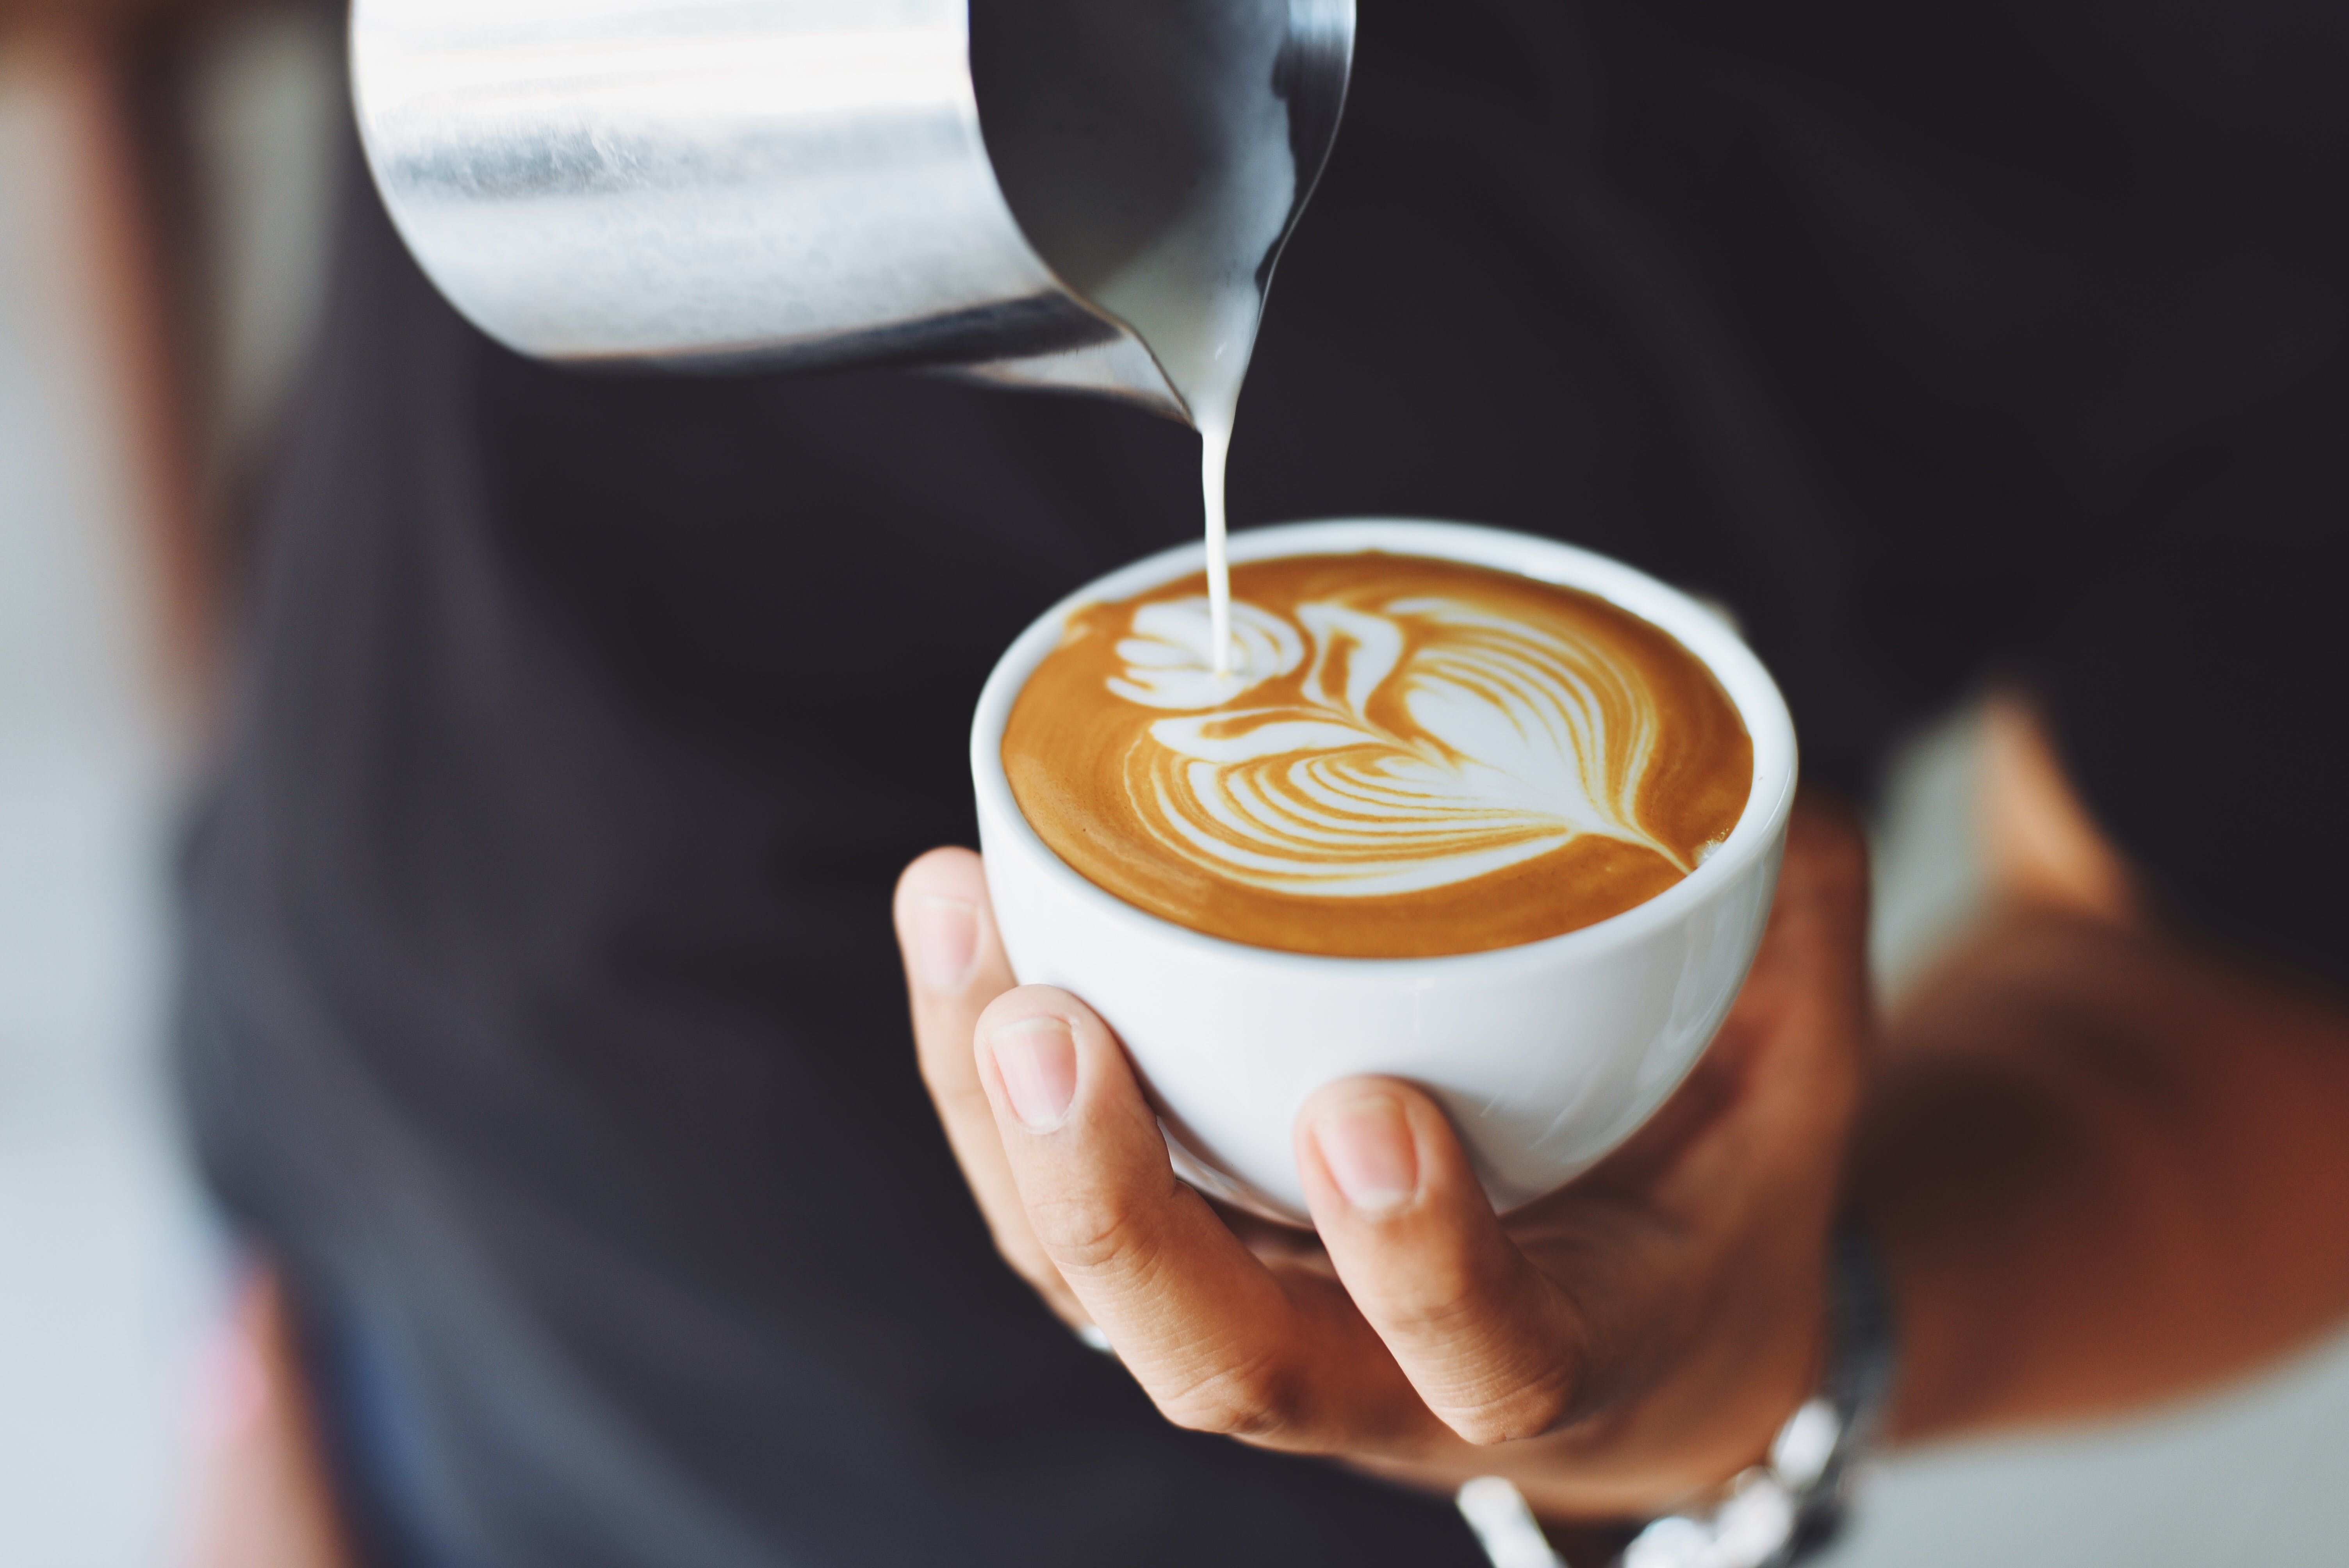 A person holding a cup of latte. | Source: Pexels